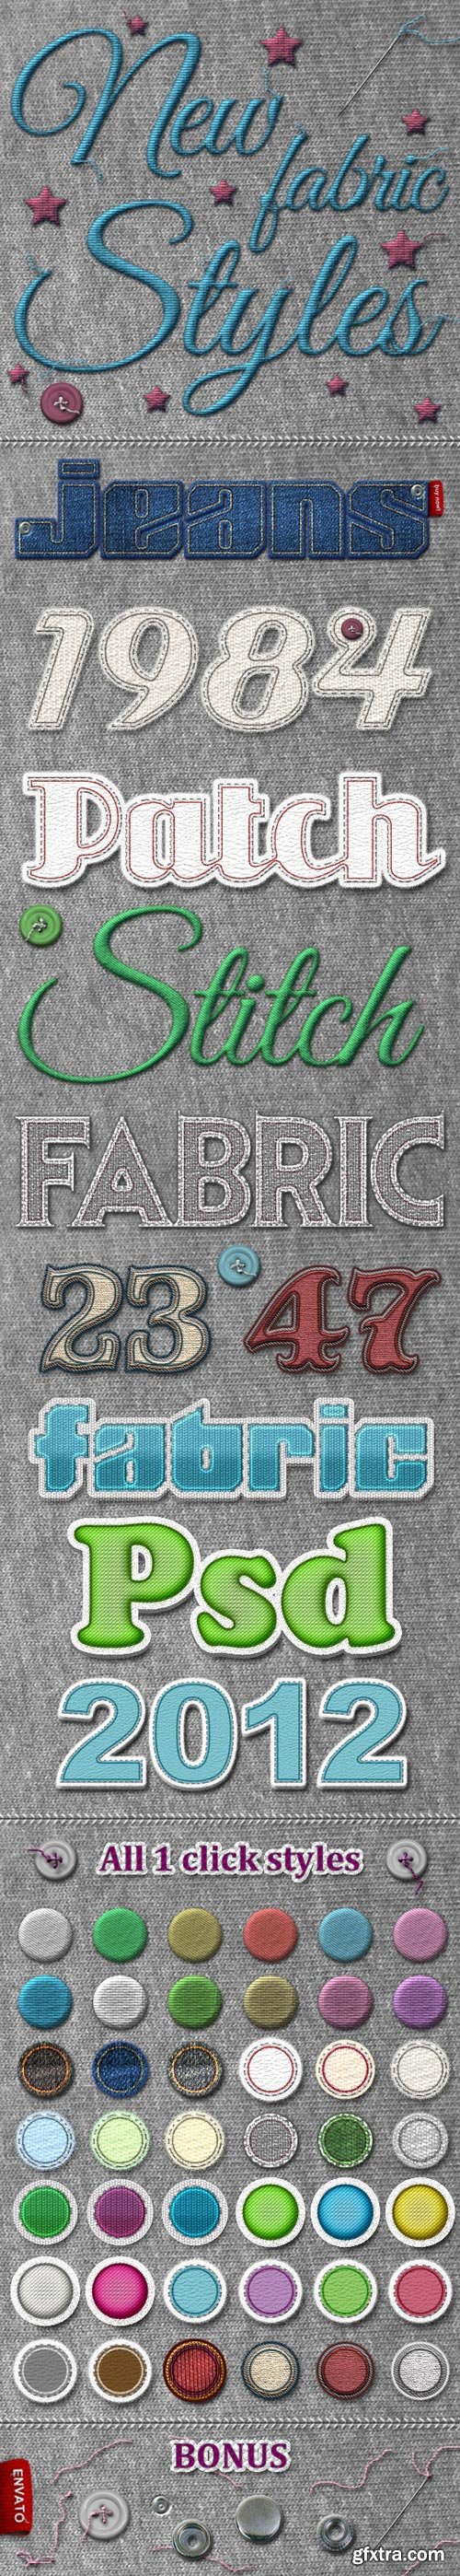 GraphicRiver - New Fabric Styles 2563182